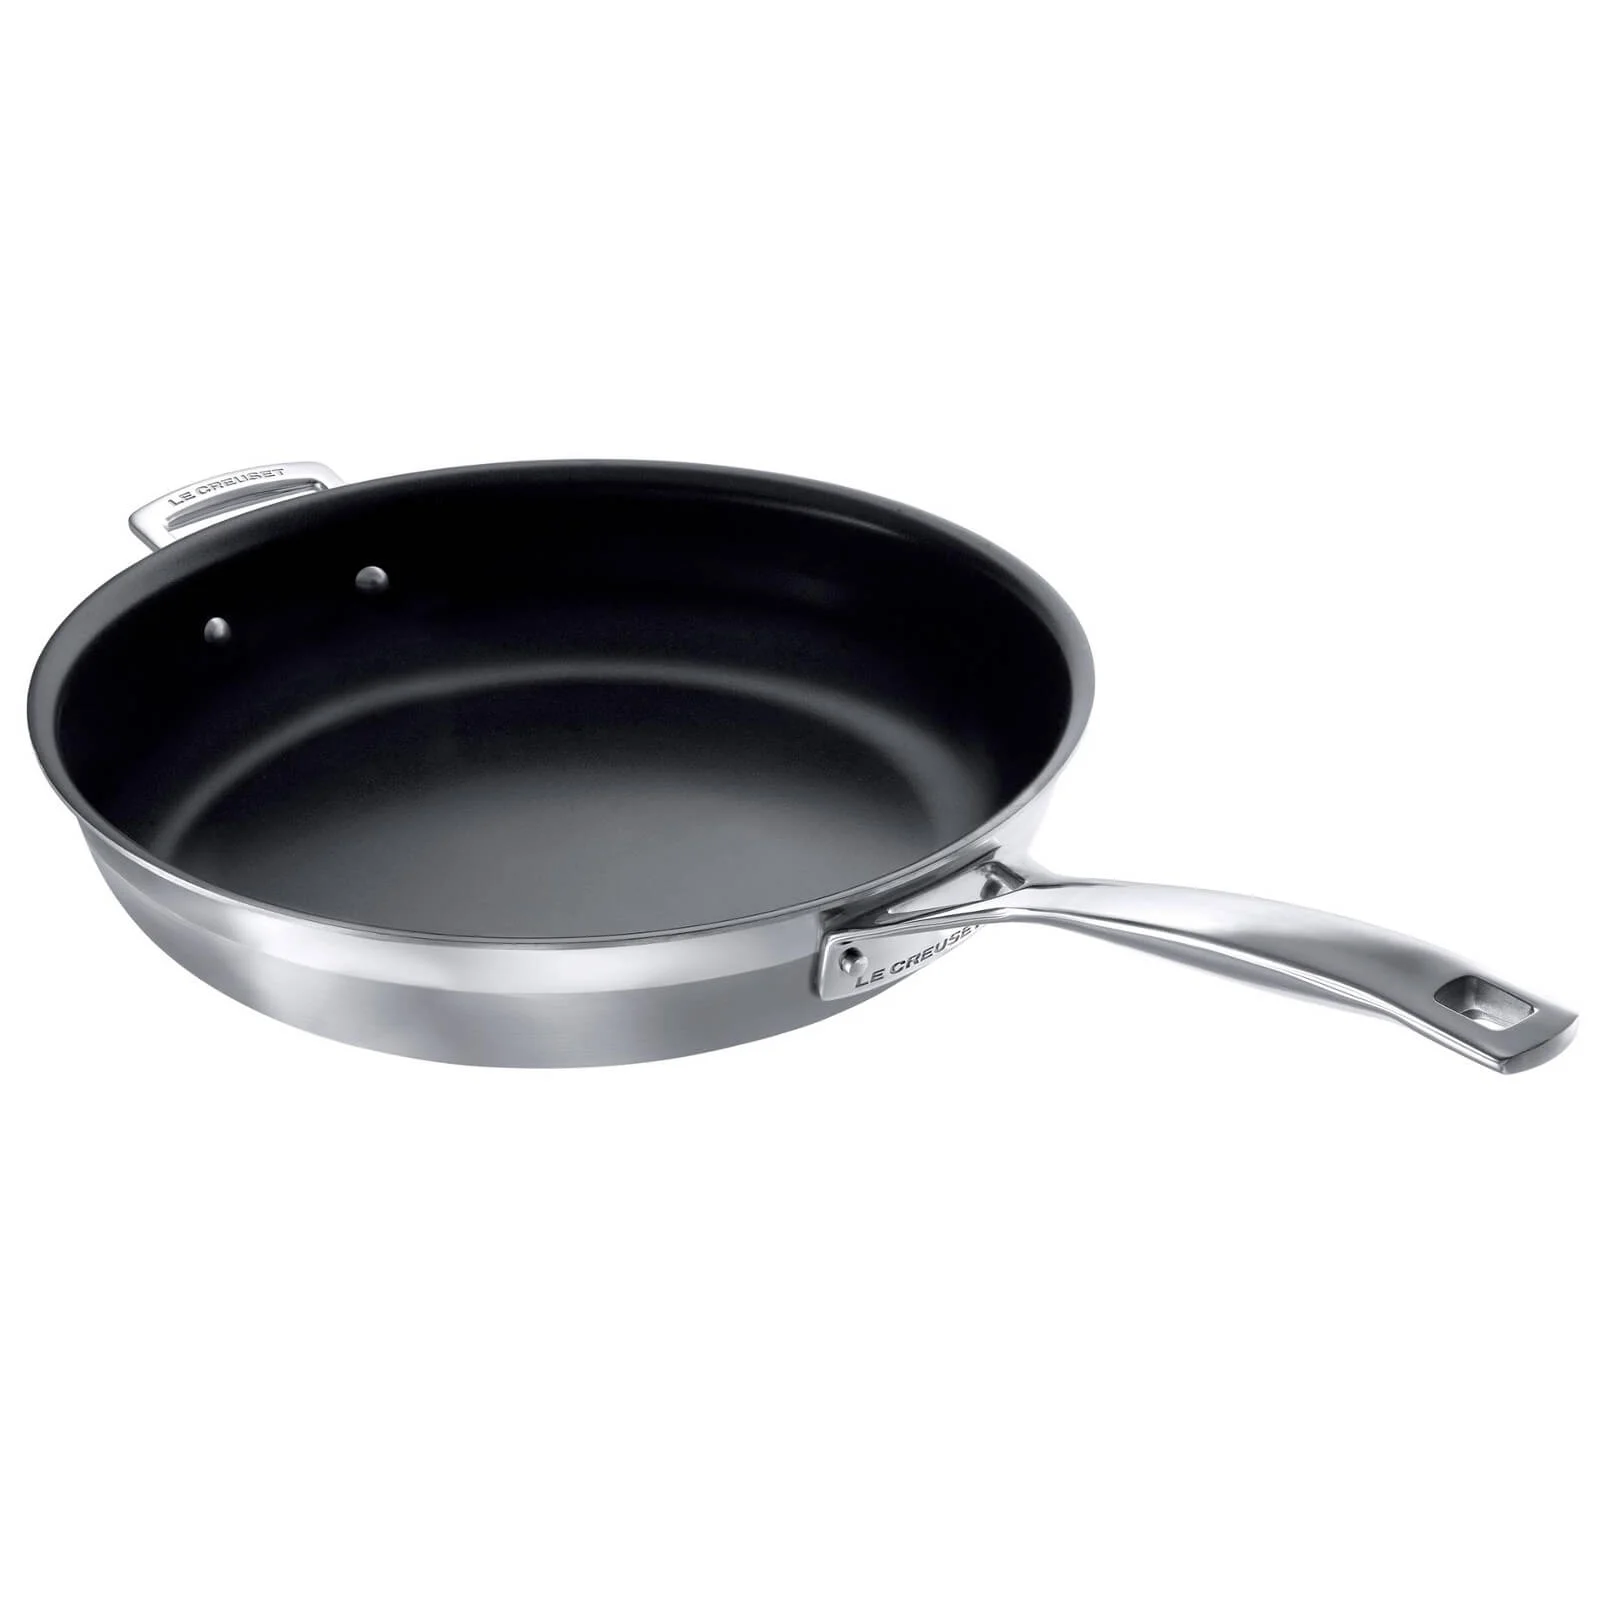 Le Creuset 3-Ply Stainless Steel Non-Stick Frying Pan - 30cm Image 1